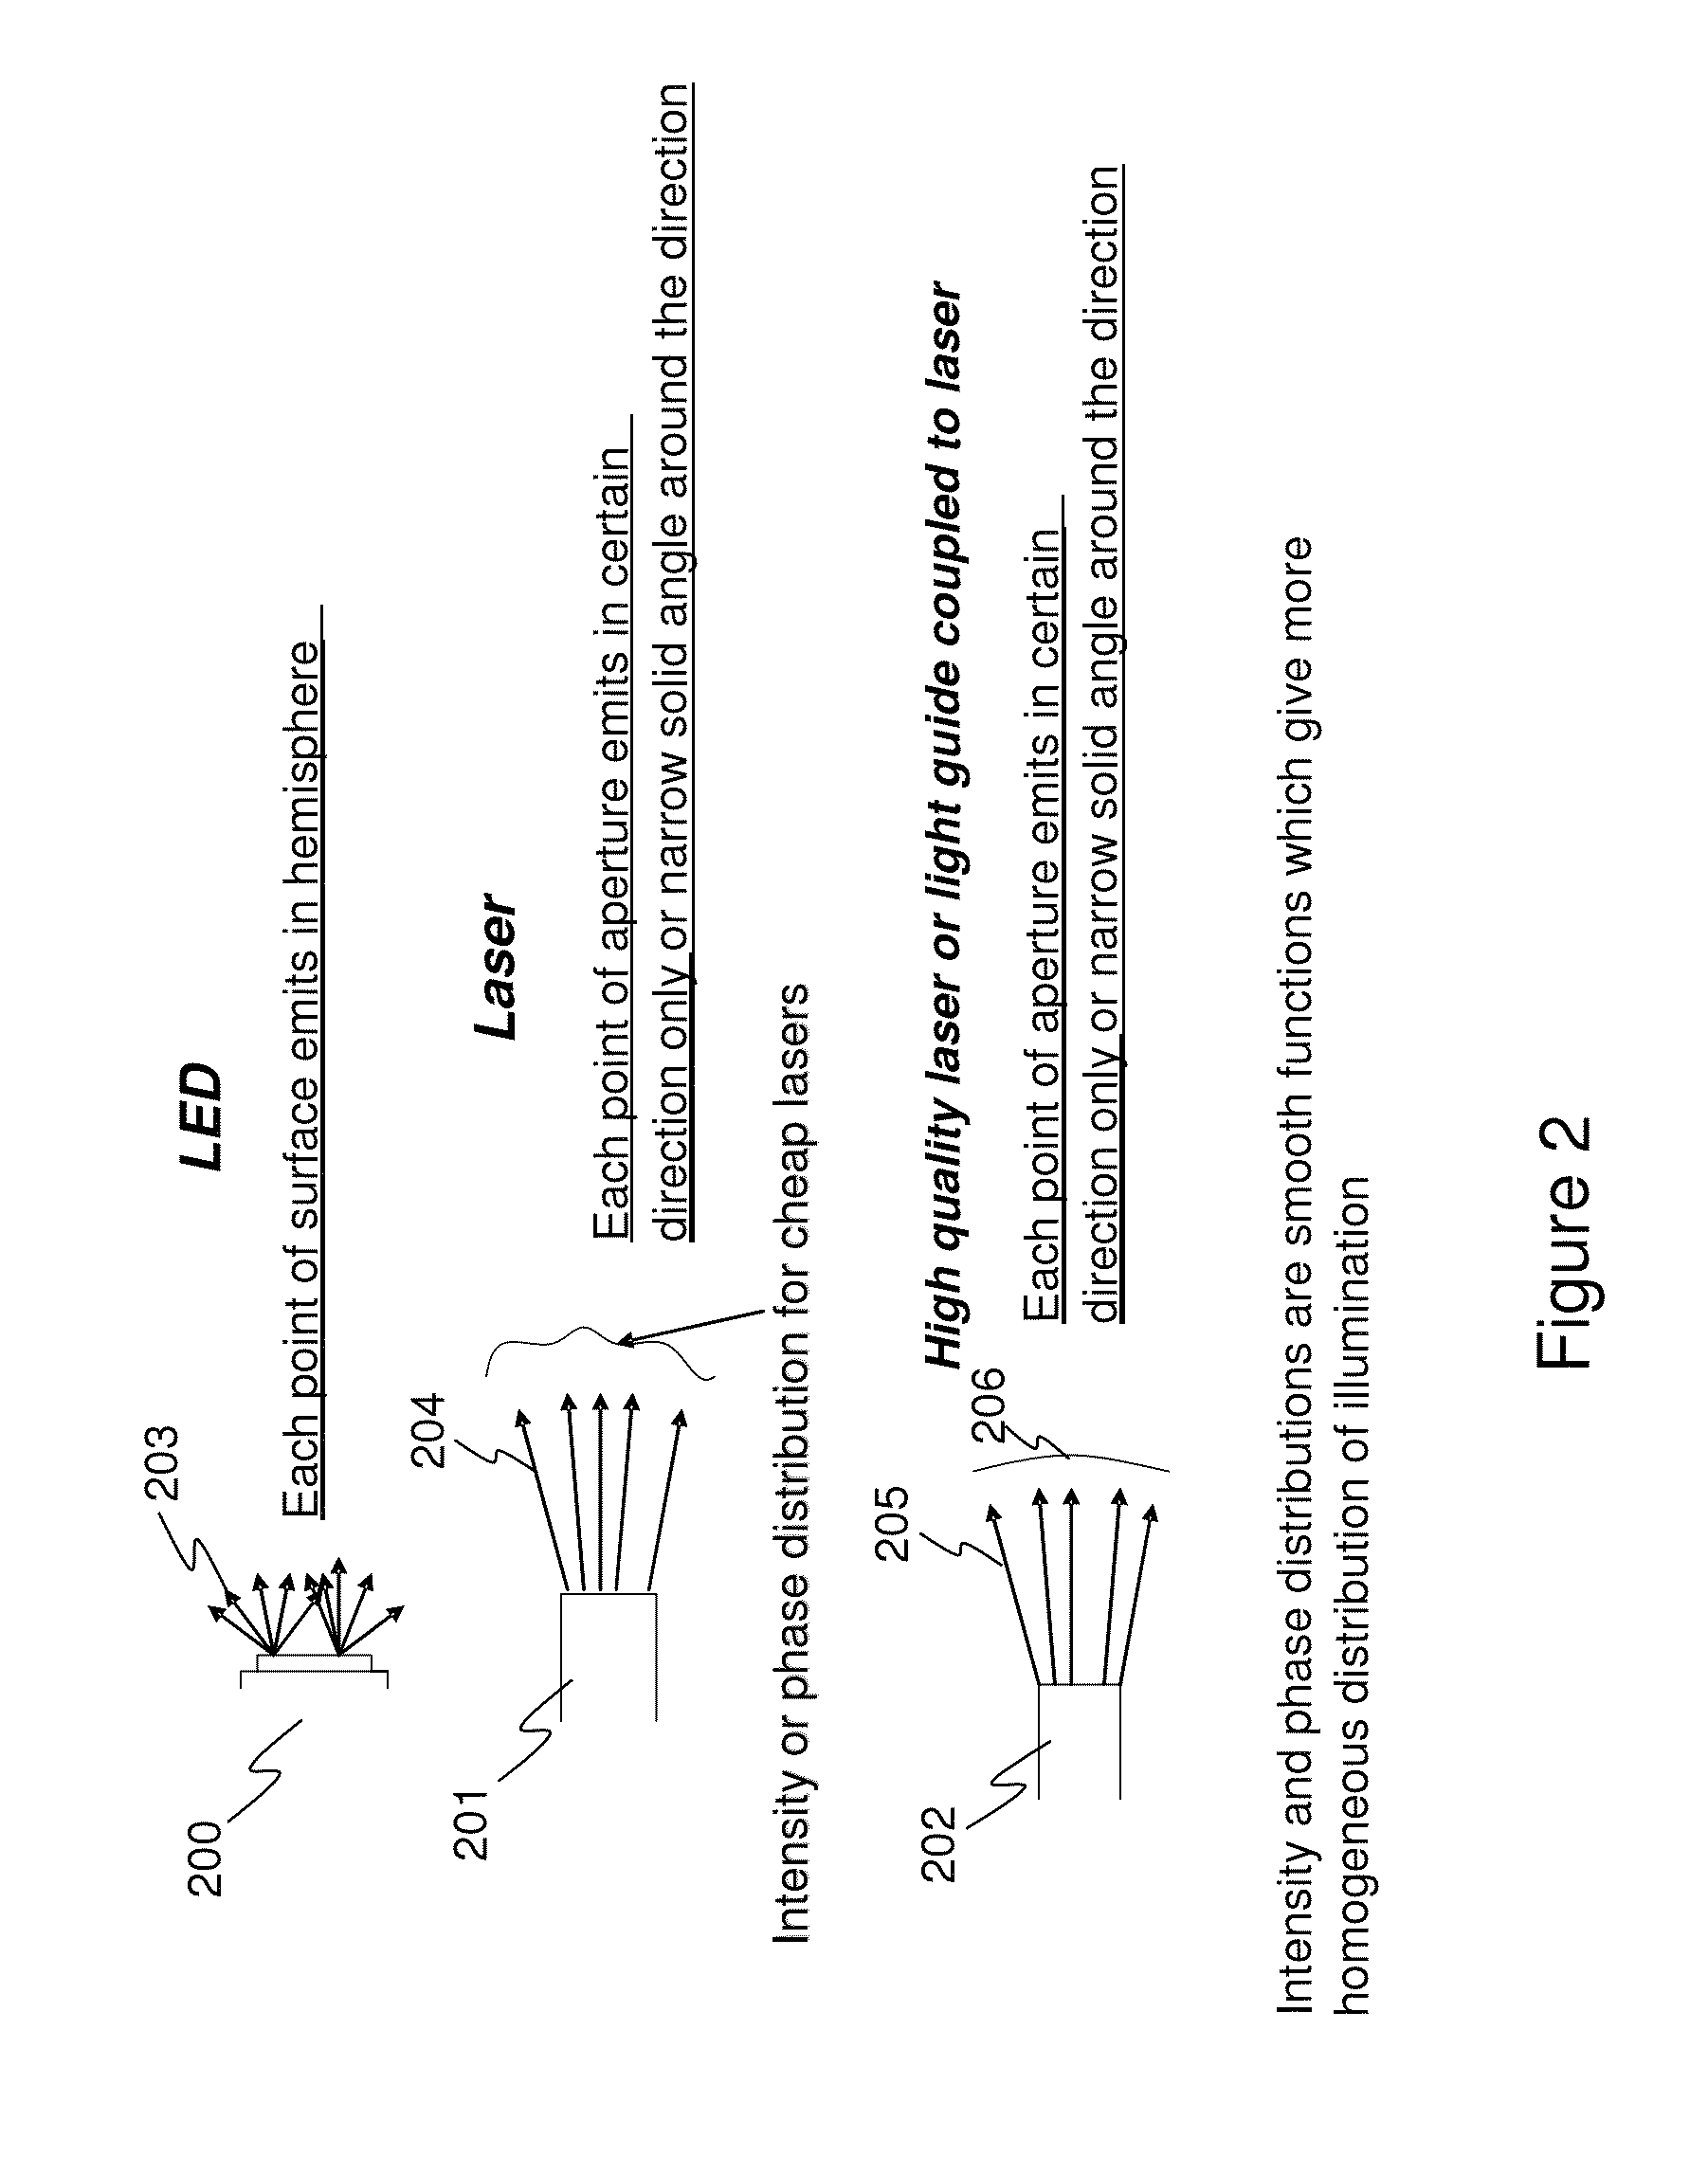 High speed acquisition vision system and method for selectively viewing object features